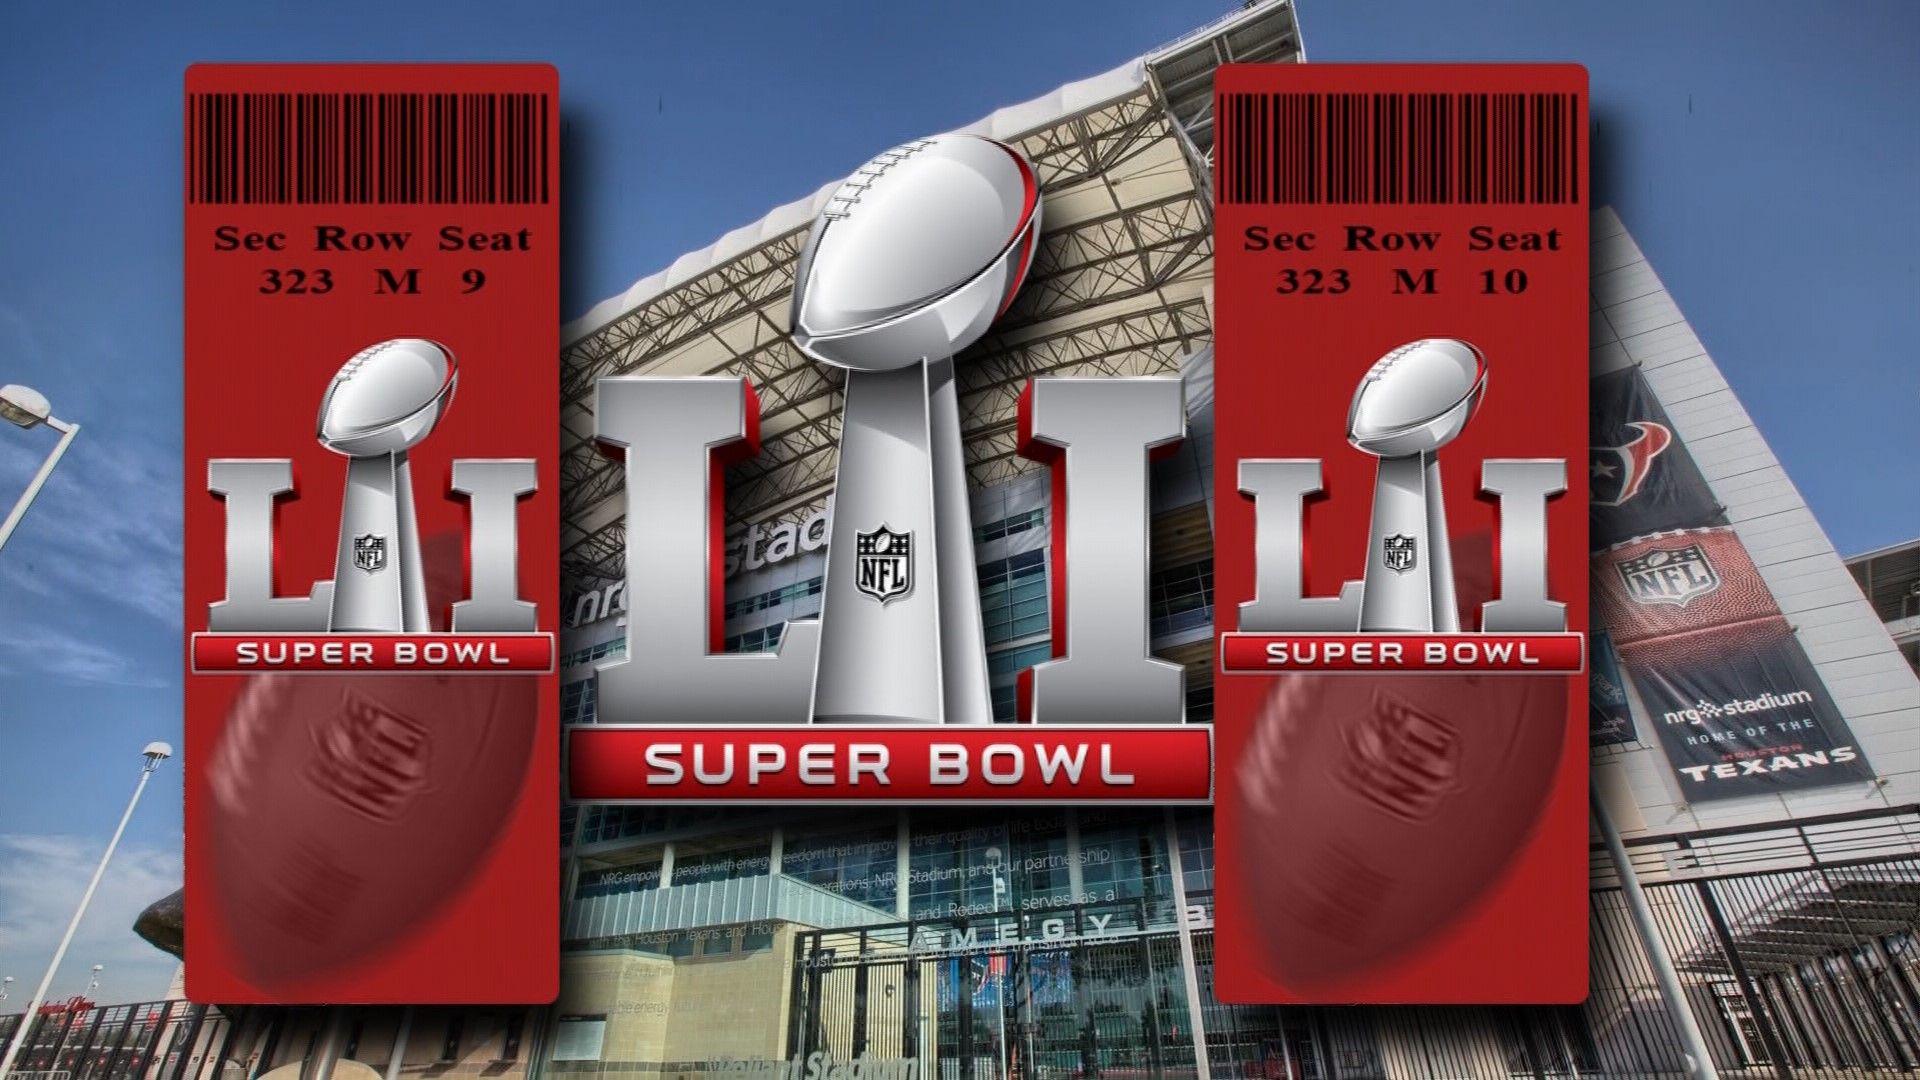 How difficult is it to get a Super Bowl 51 ticket?